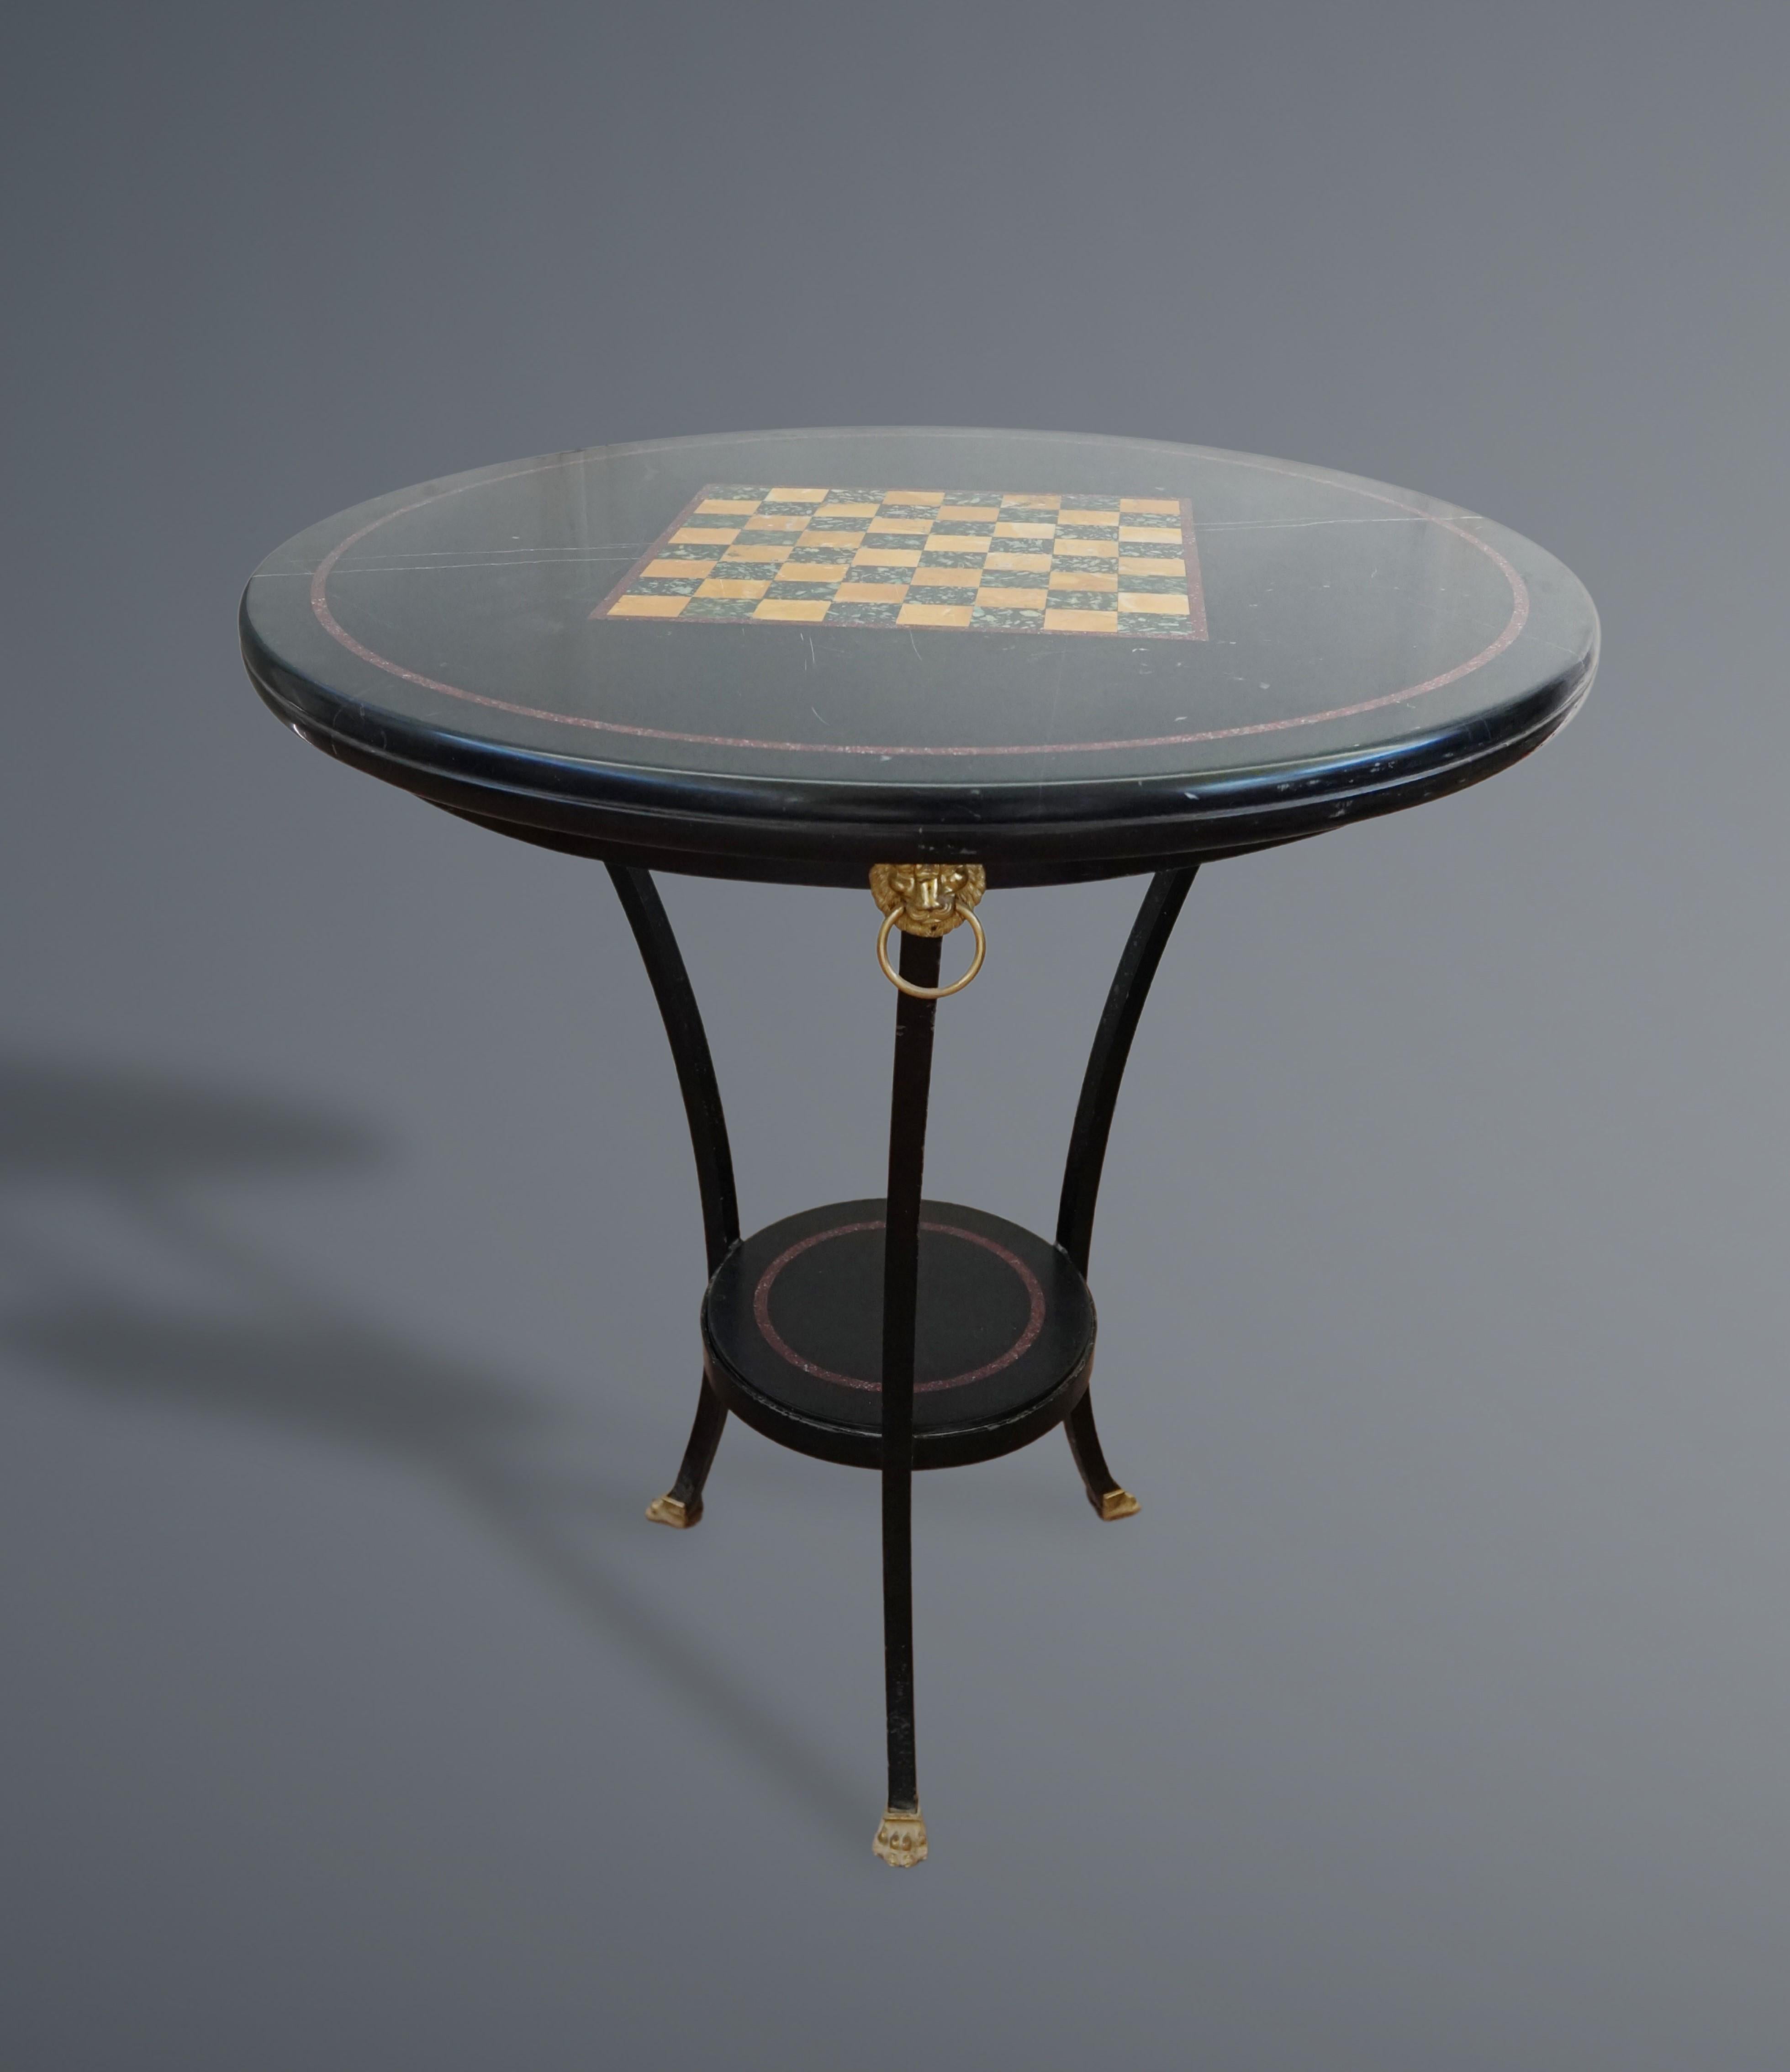 Table with black marble top inlaid with lady, lower part in bronze with black patina and parts in gilt bronze, late 19th century. Dimensions:86x79x79cm. Good condition - used with small signs of aging & blemishes. ADDITIONAL PHOTOS AND INFORMATION